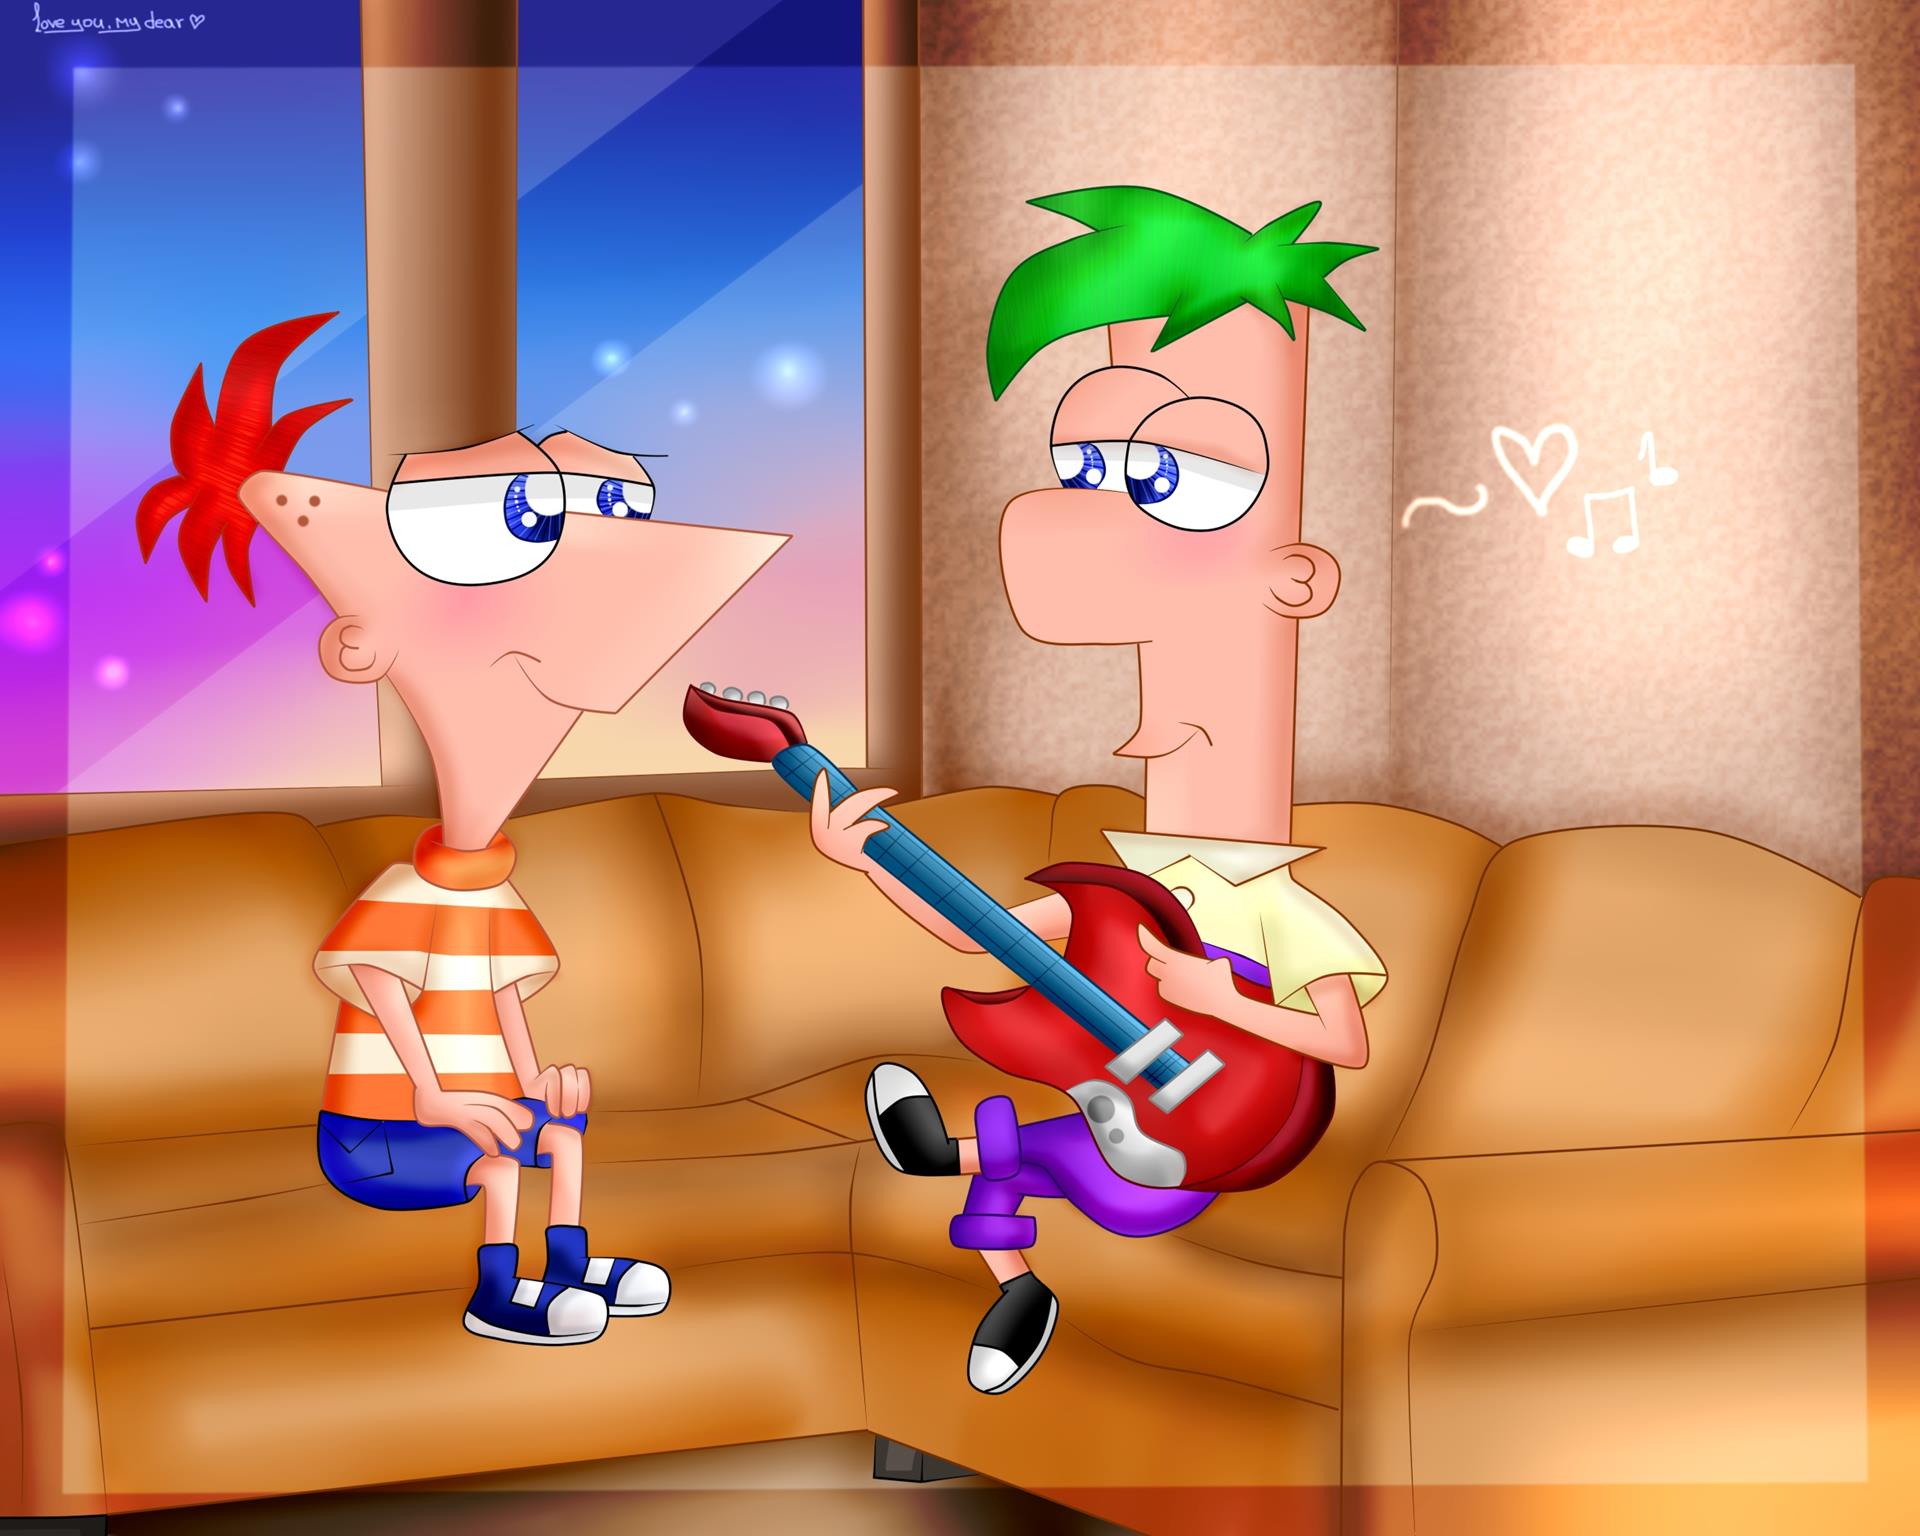 Do You Like Phineas and Ferb?